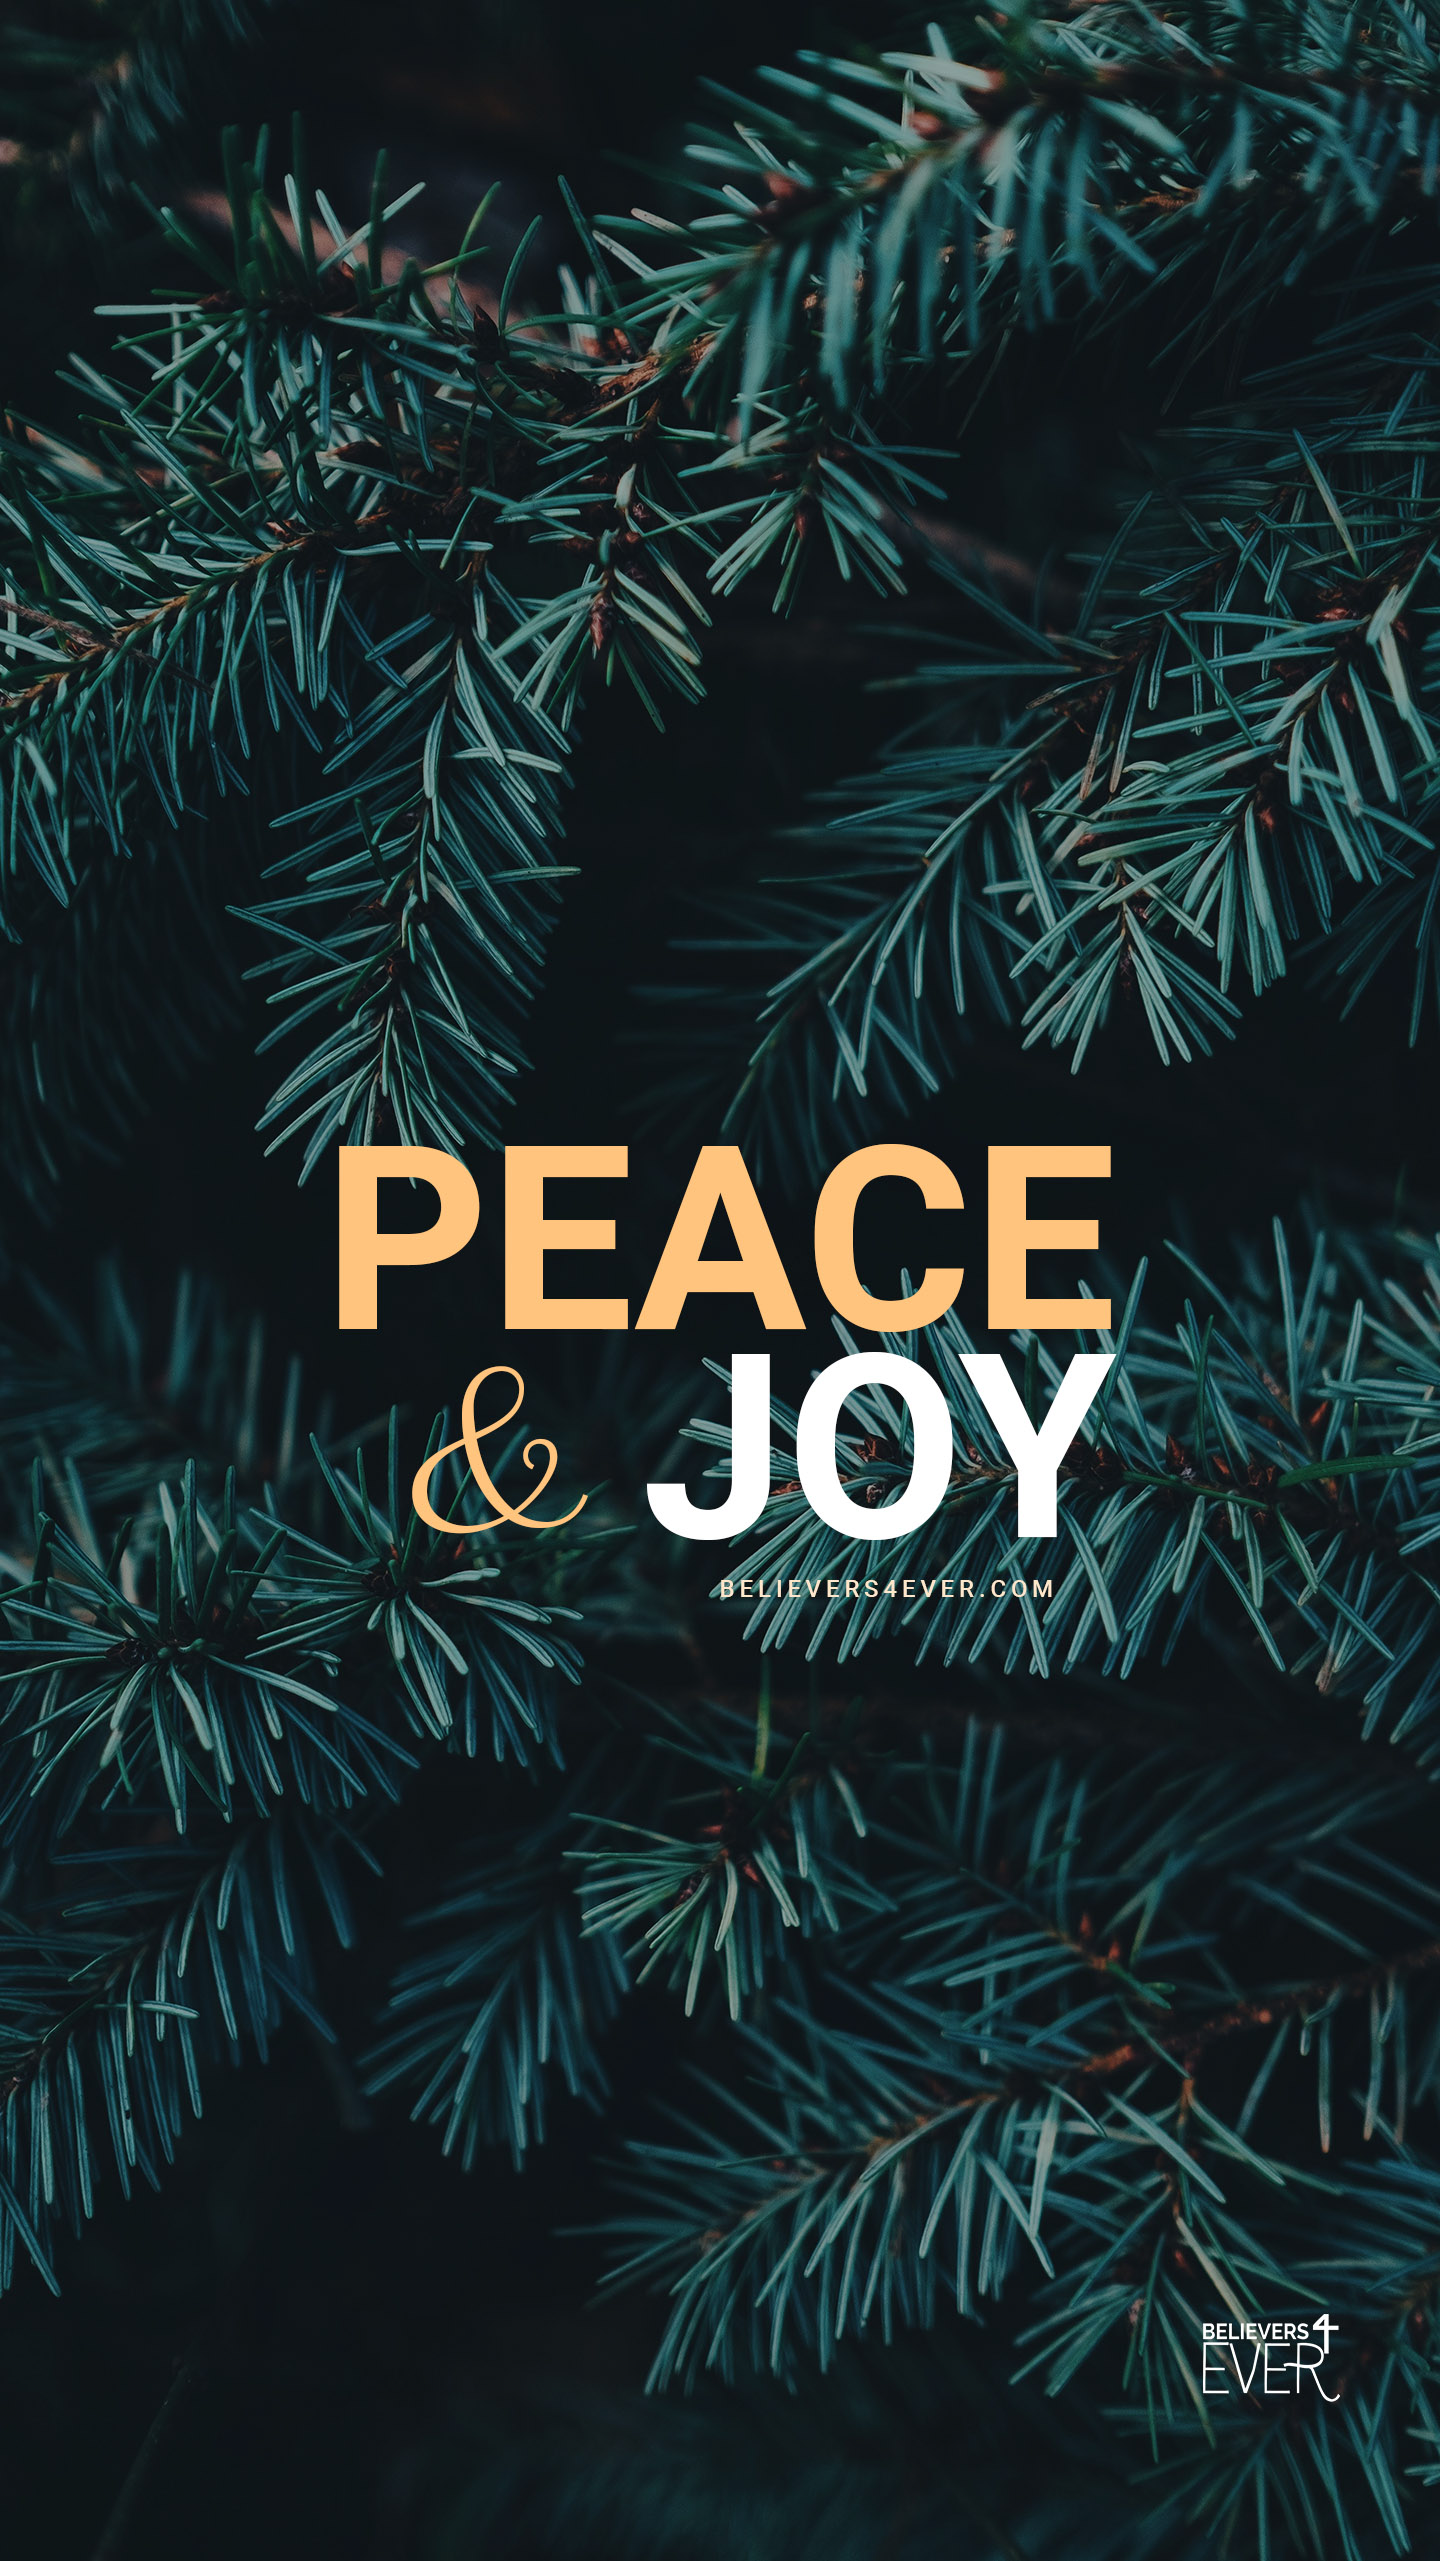 A peace and joy poster with green pine branches - Peace